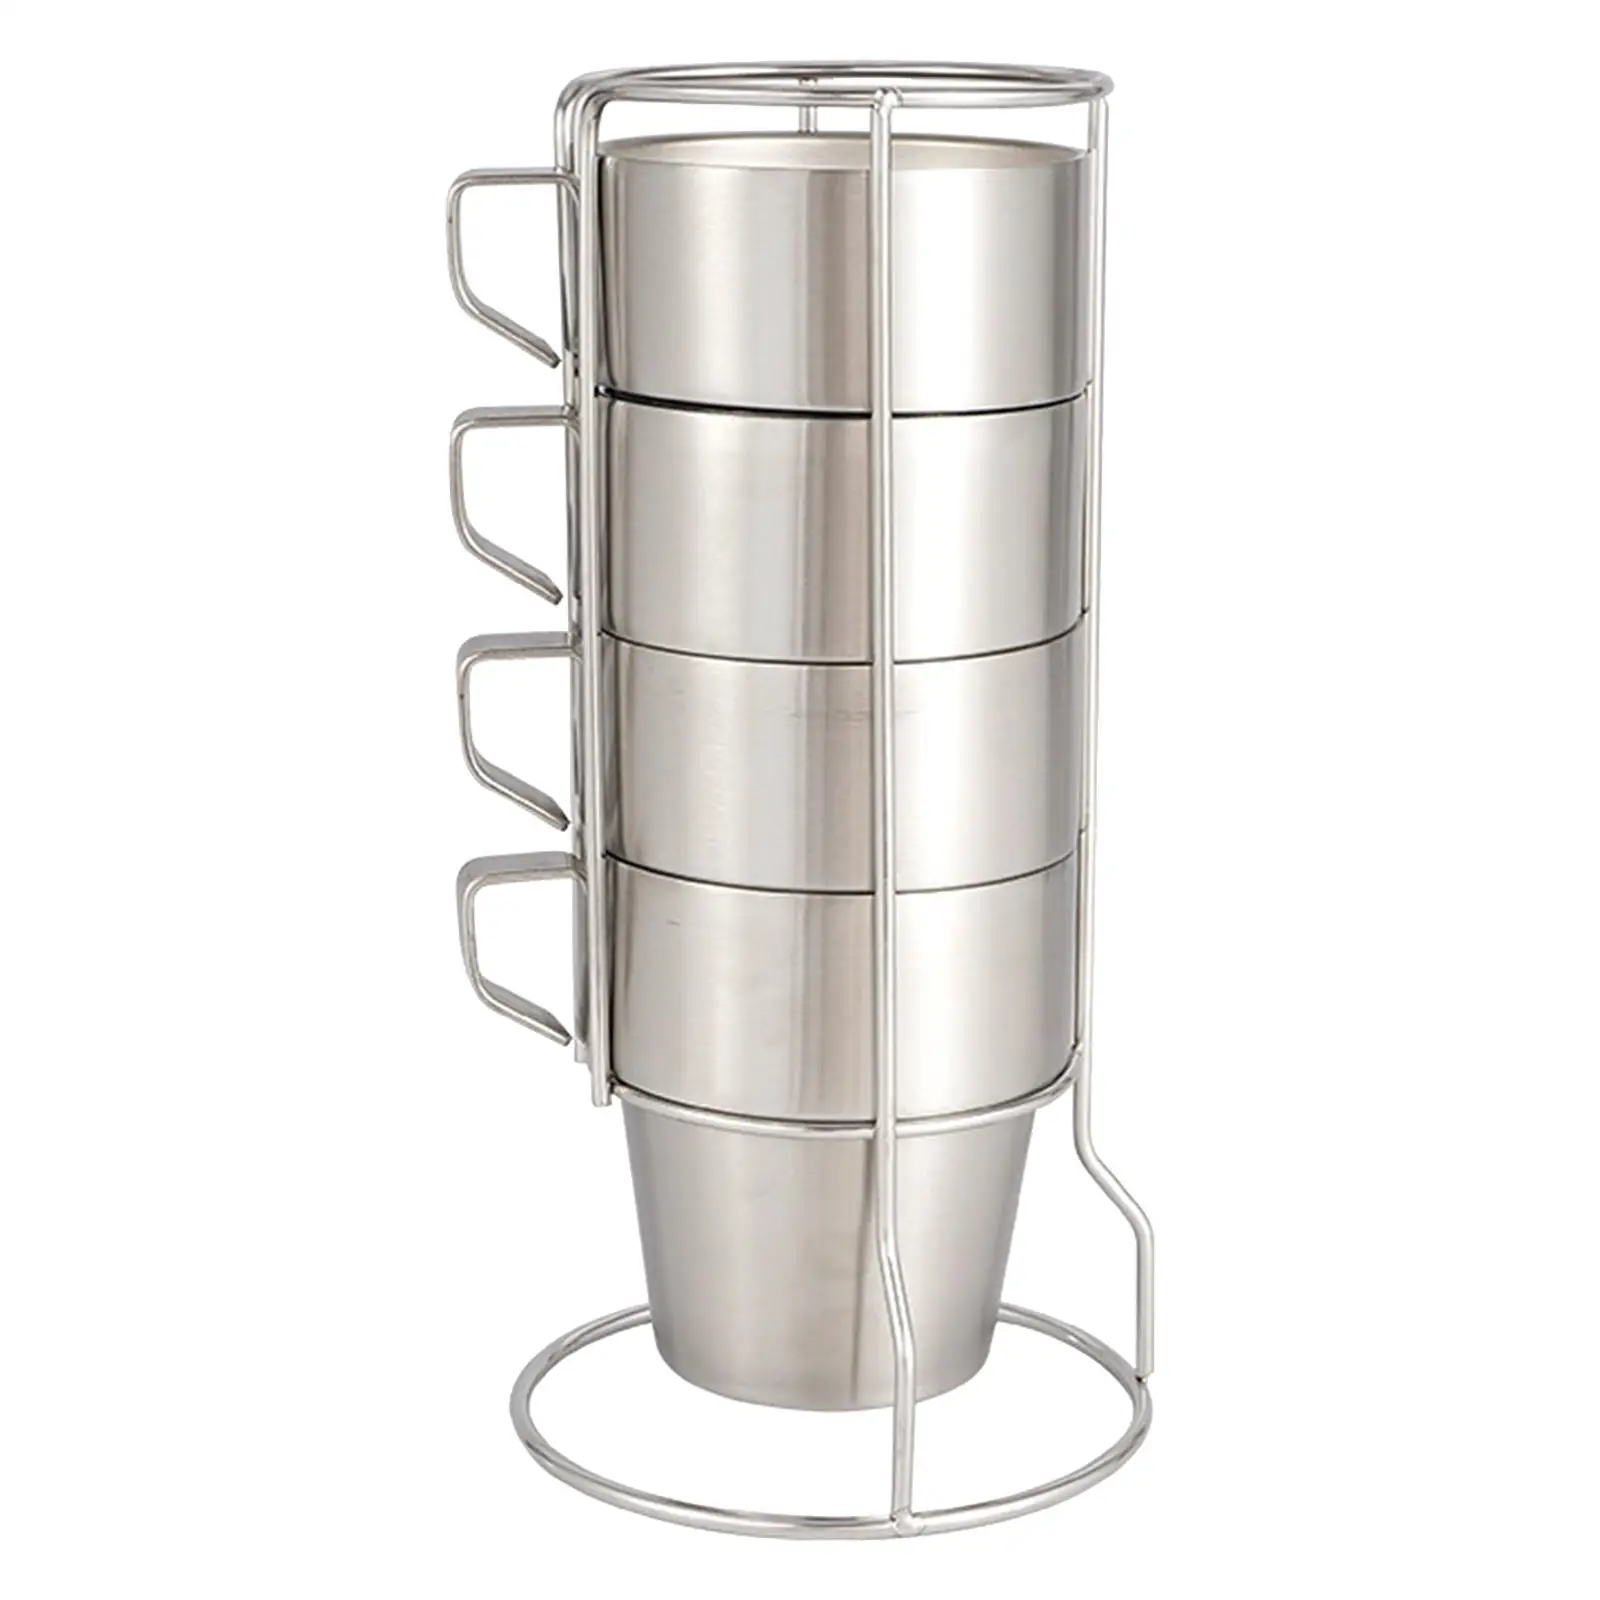 Coffee Cups Double Layer with Iron Frame for Home Hiking 301-400ml for Ice Drinks/Hot Beverage